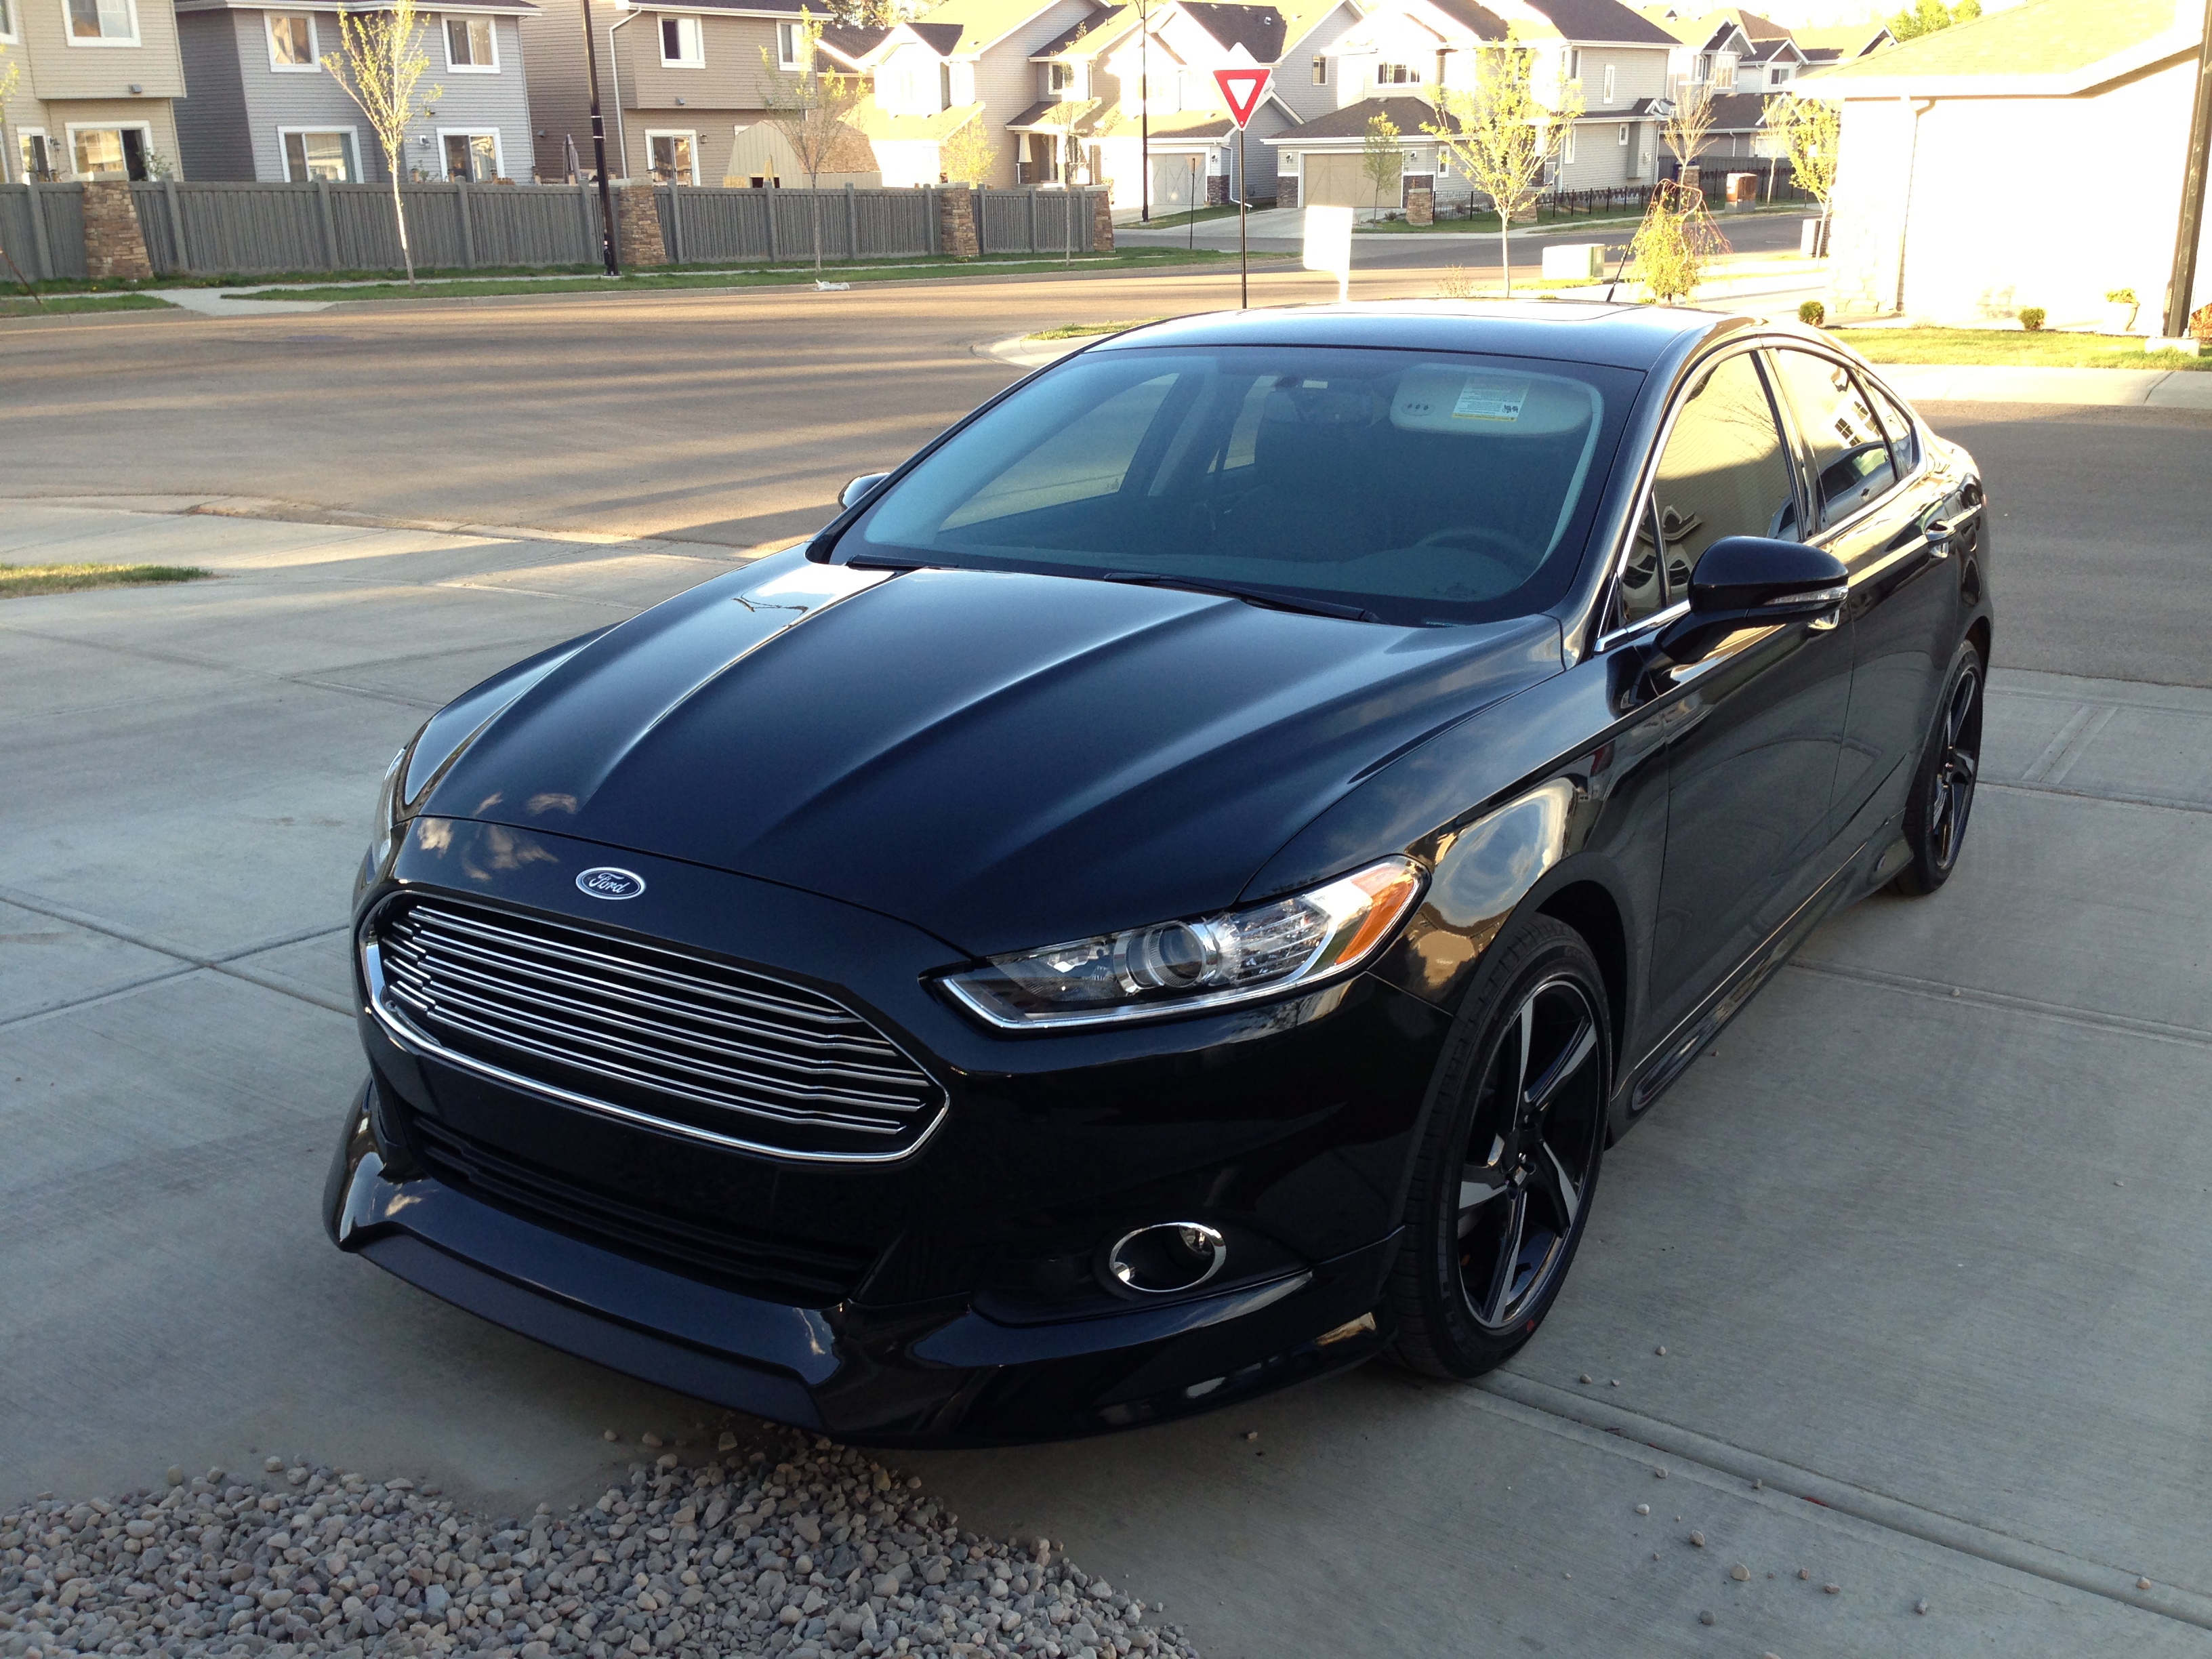 Ford Fusion exterior model